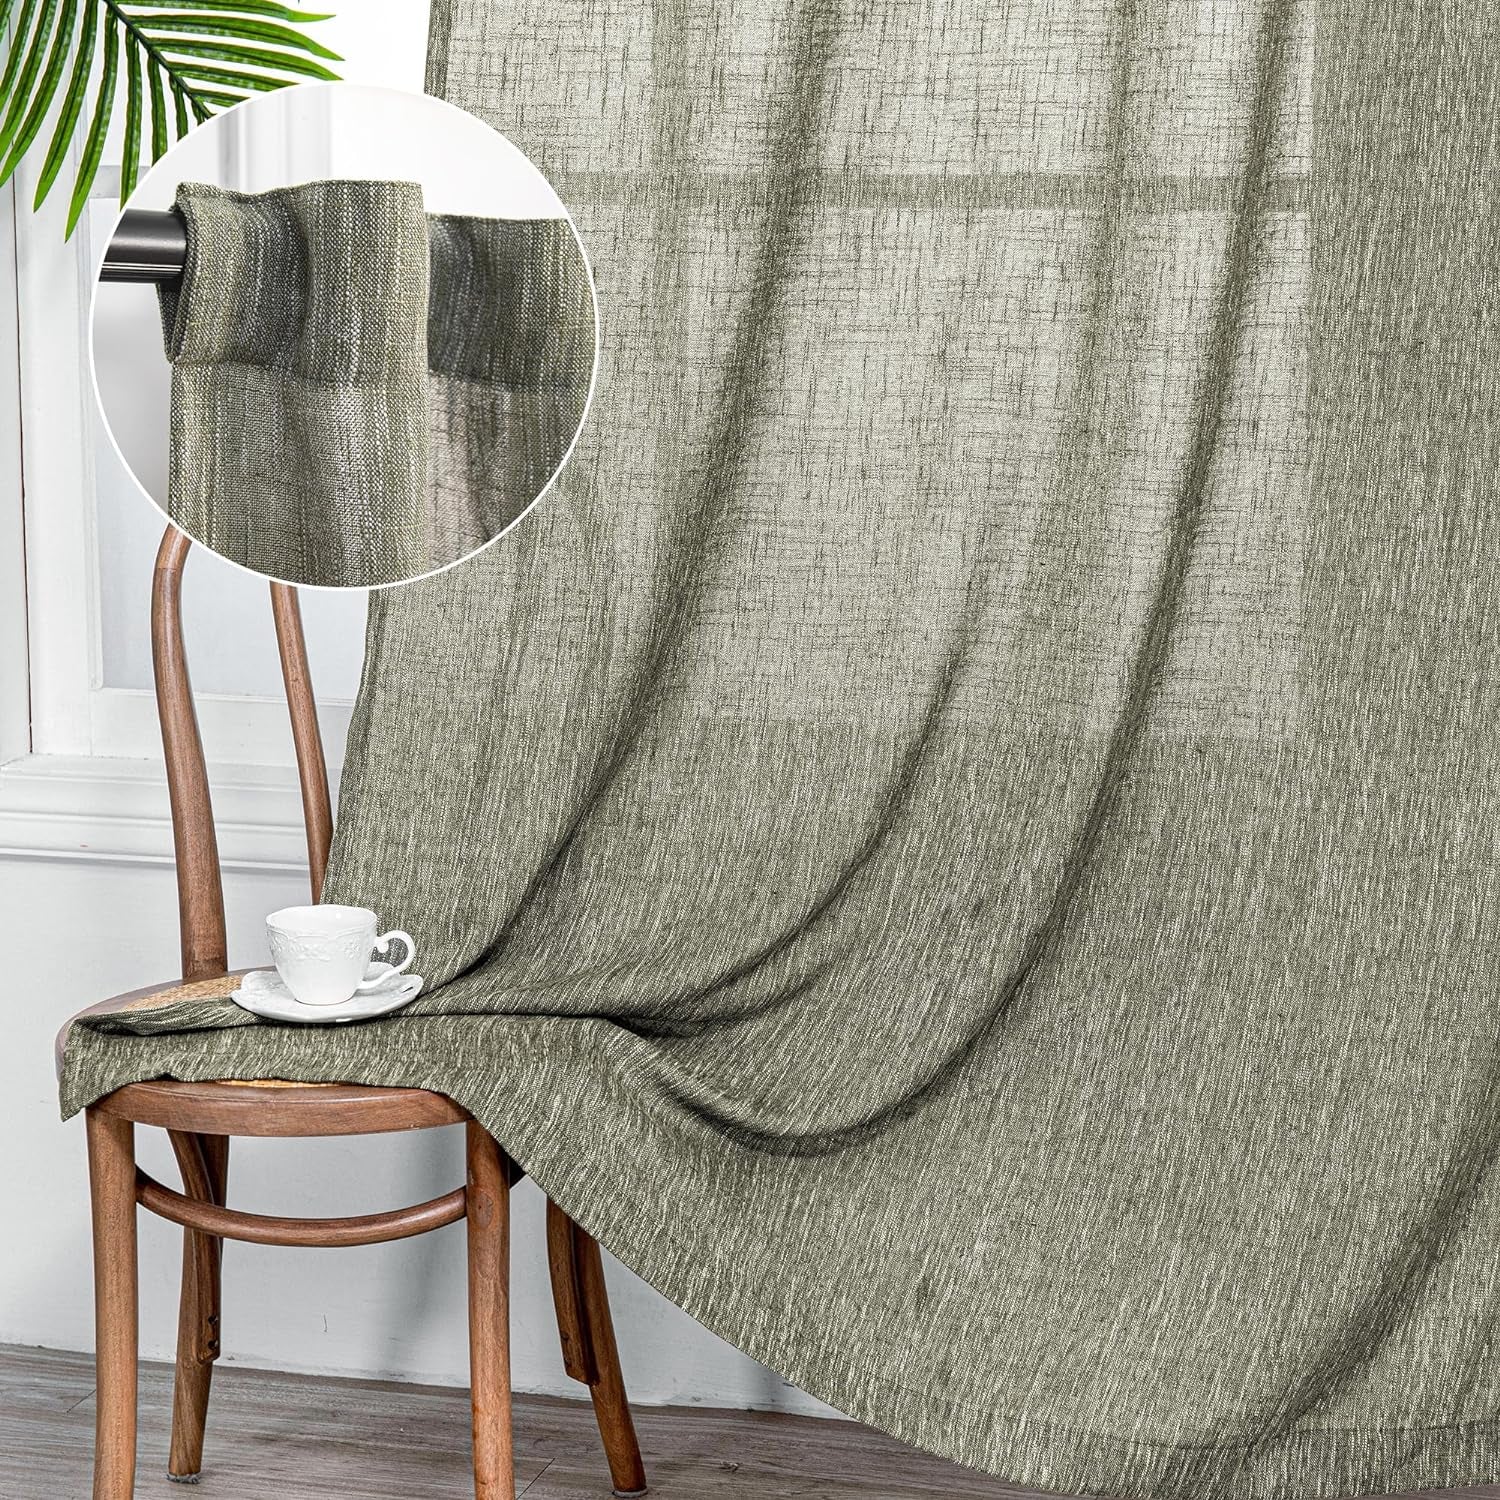 MYSKY HOME 90 Inch Curtains for Sliding Glass Door Windows, Living Room Decoration Cotton Drapes Soft Comfortable Touch Farmhouse Country Patio Treatment Set, 50" Width, Natural, 2 Panels  MYSKYTEX Olive Green 50"W X 108"L 